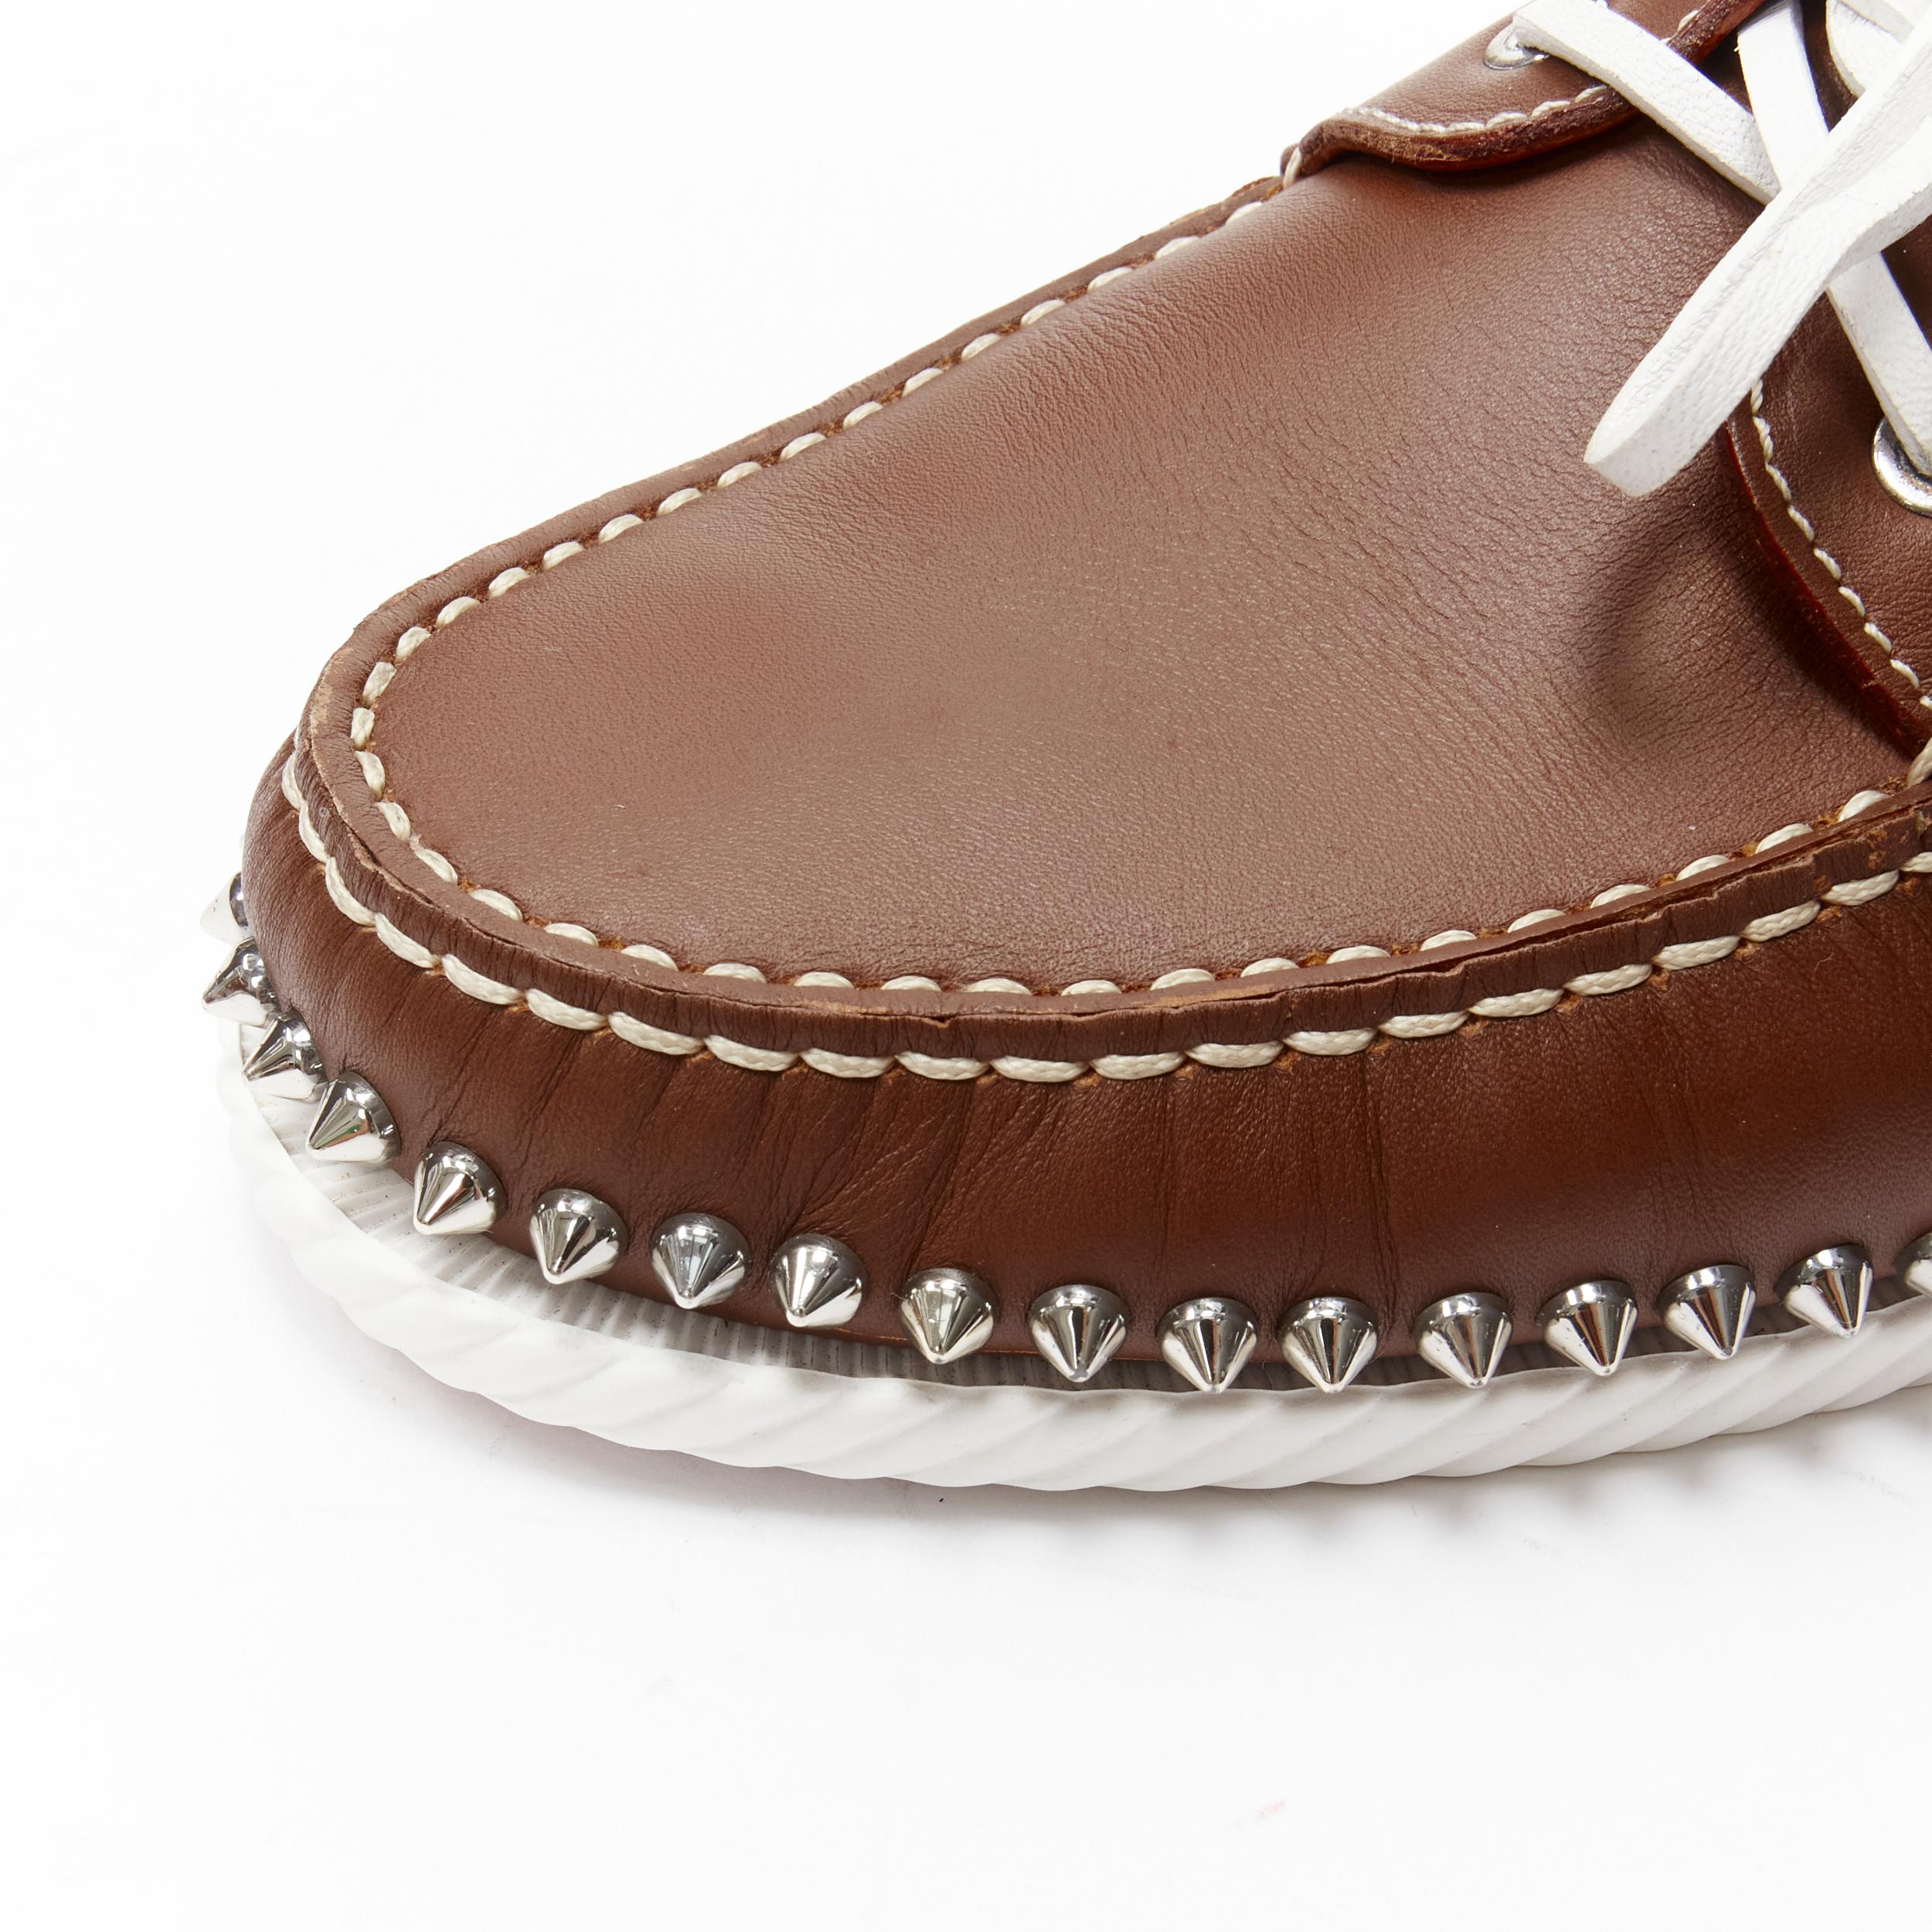 CHRISTIAN LOUBOUTIN Steckel brown leather spike lace boat shoe loafer EU43.5 1